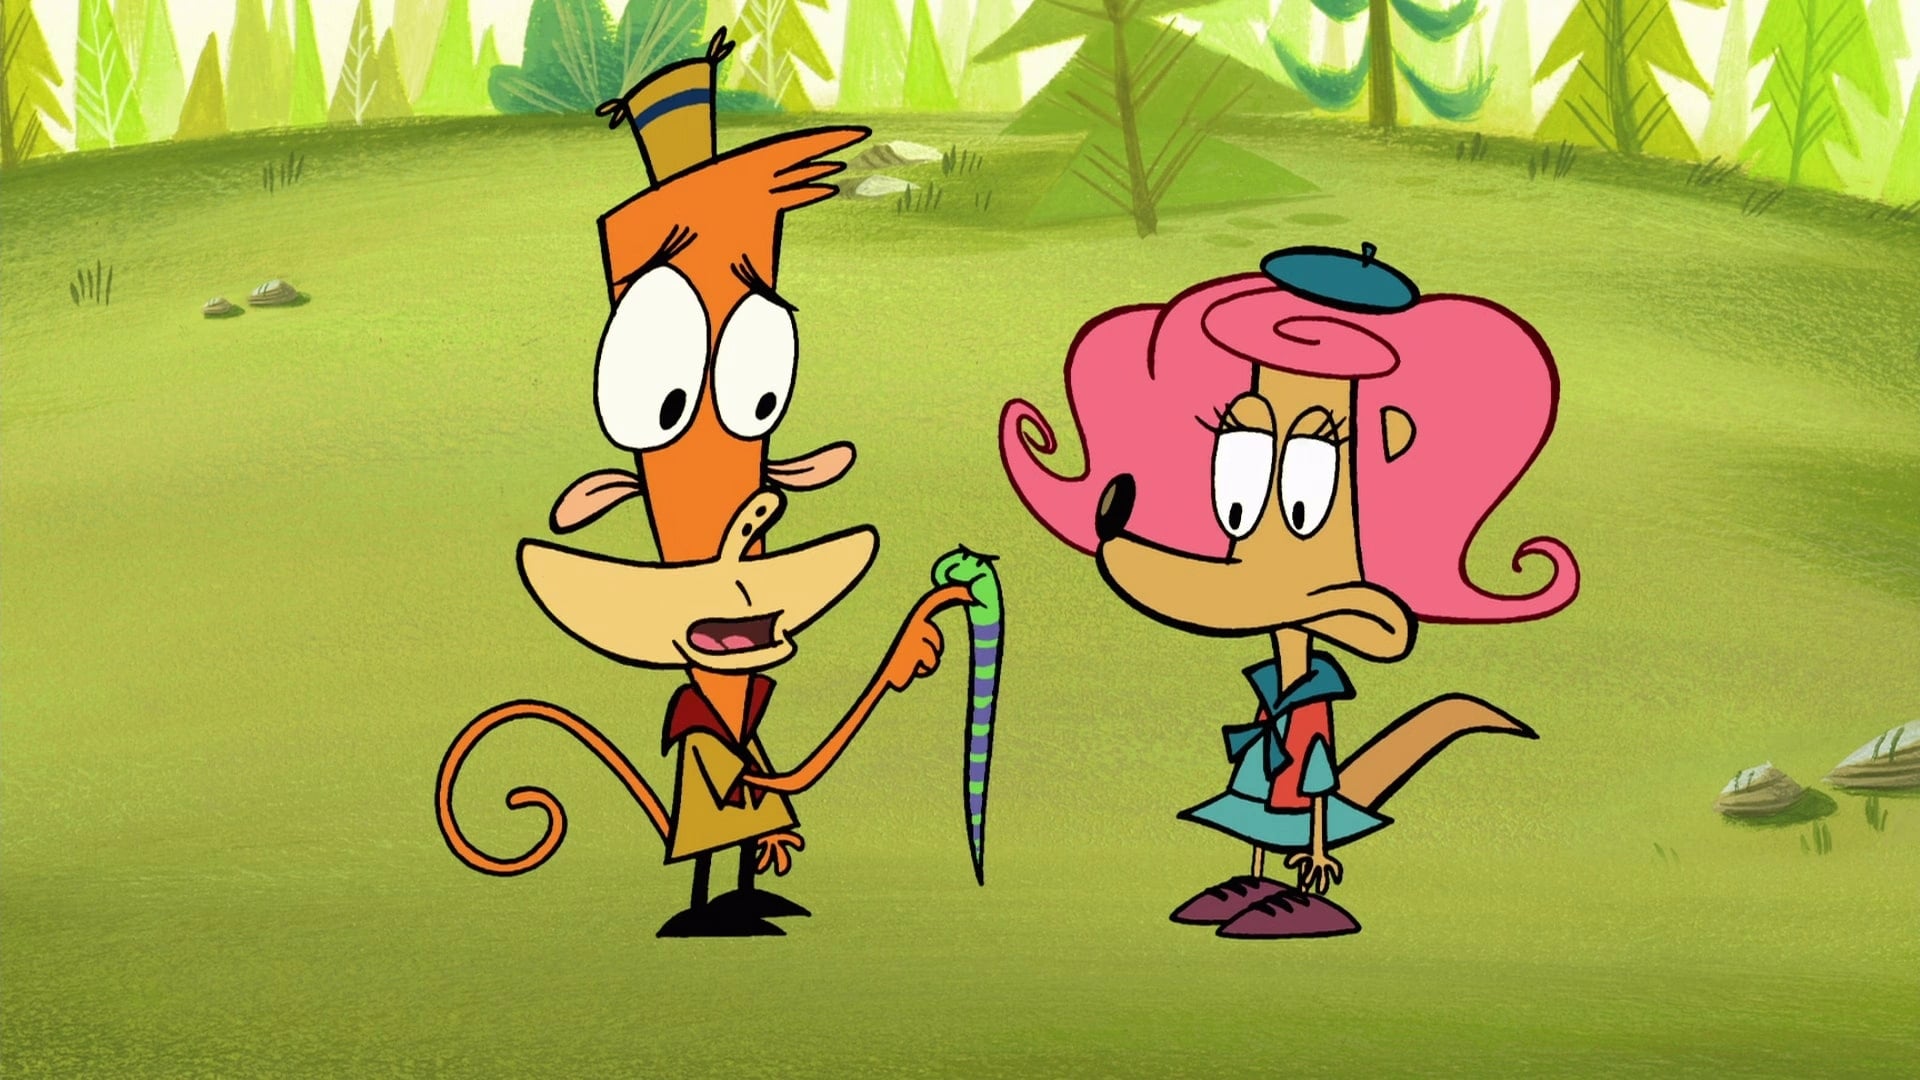 Camp Lazlo " Beans are from Mars.